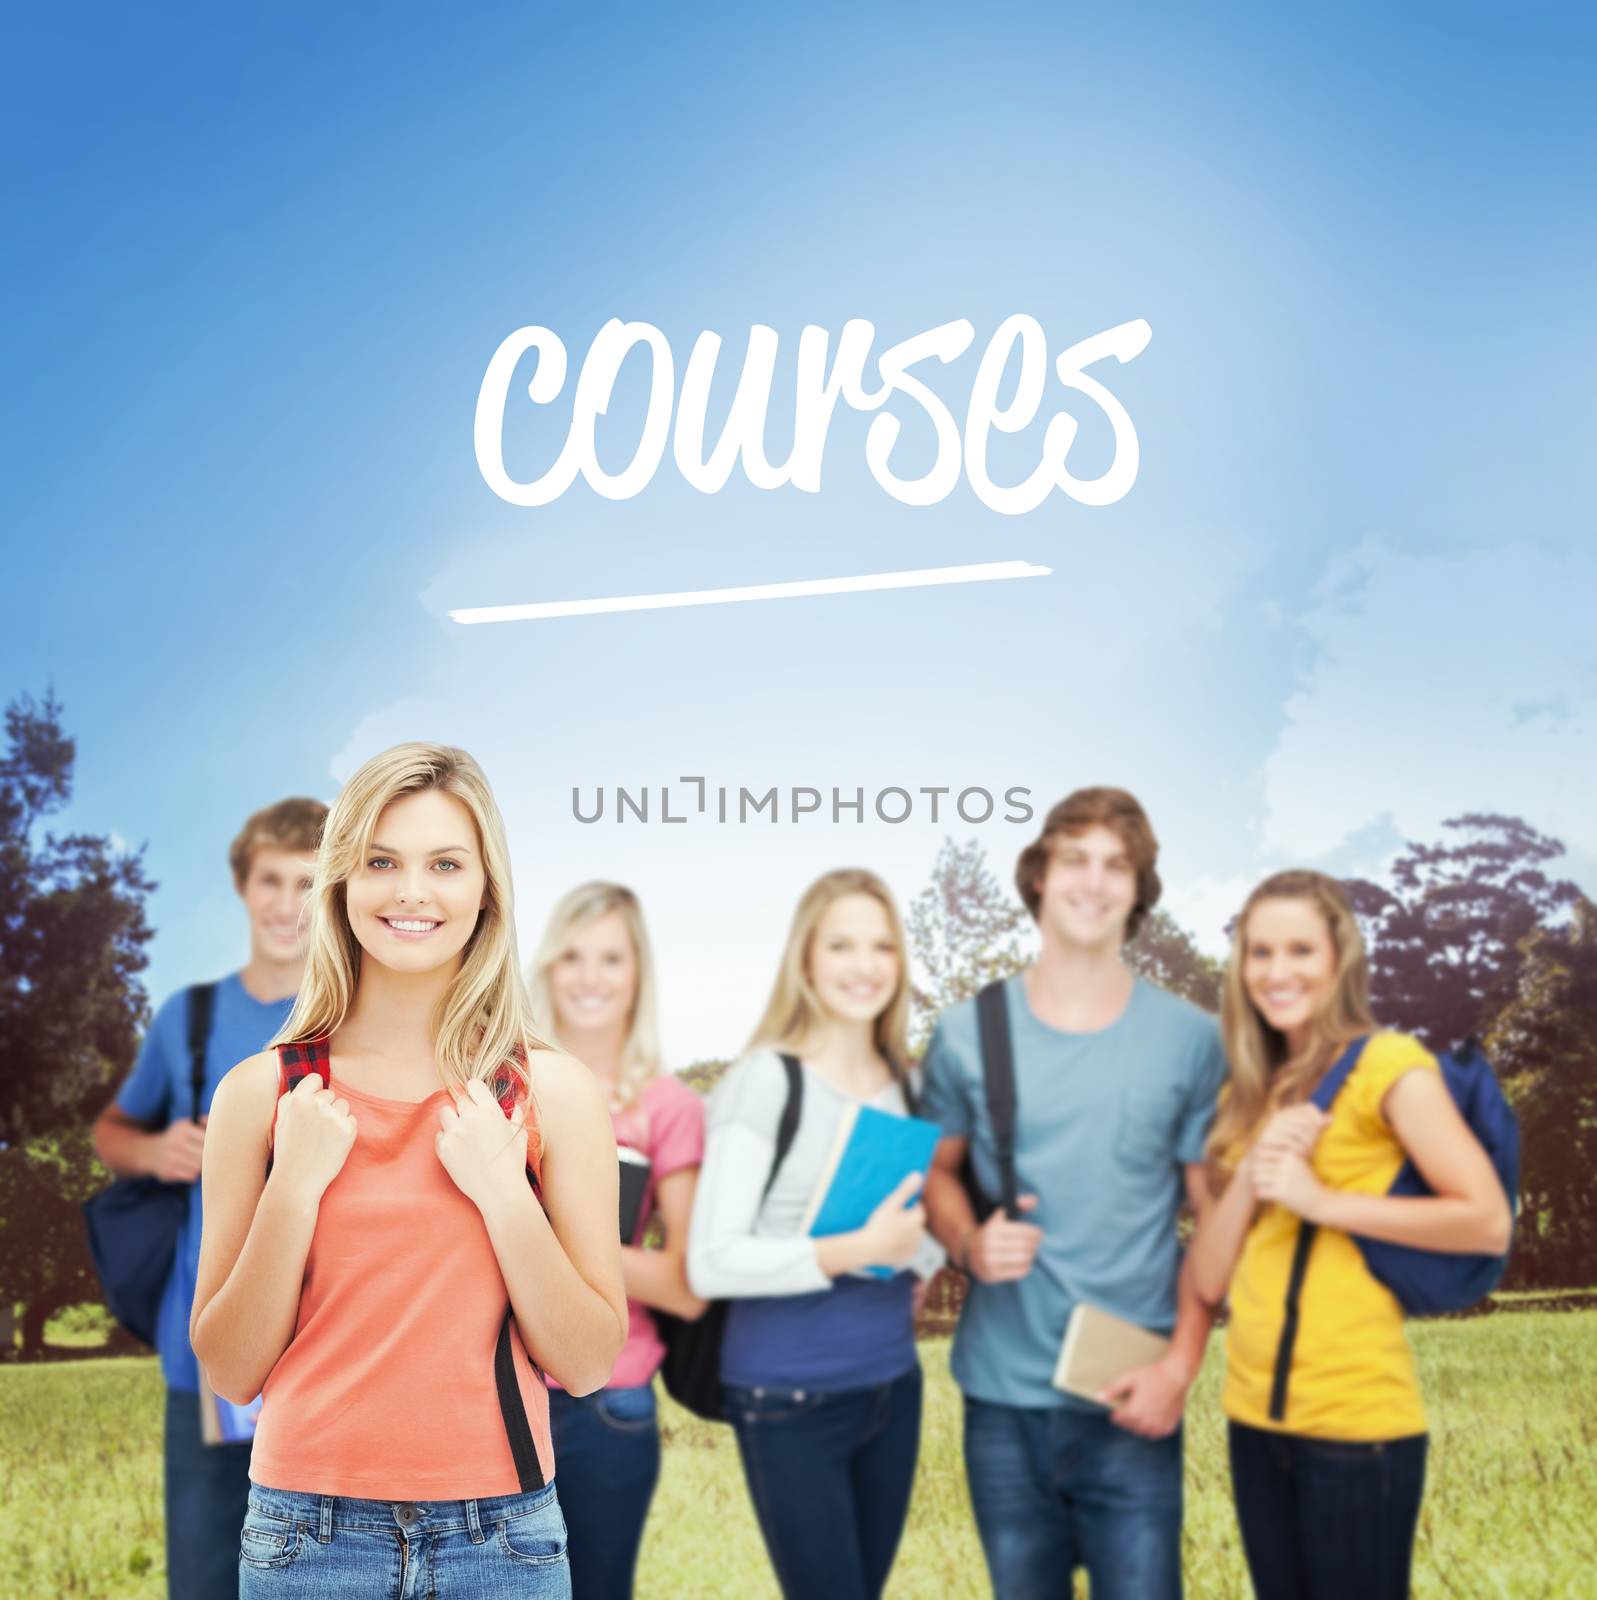 The word courses and a smiling girl stands in front of her college friends against walkway along lined trees in the park